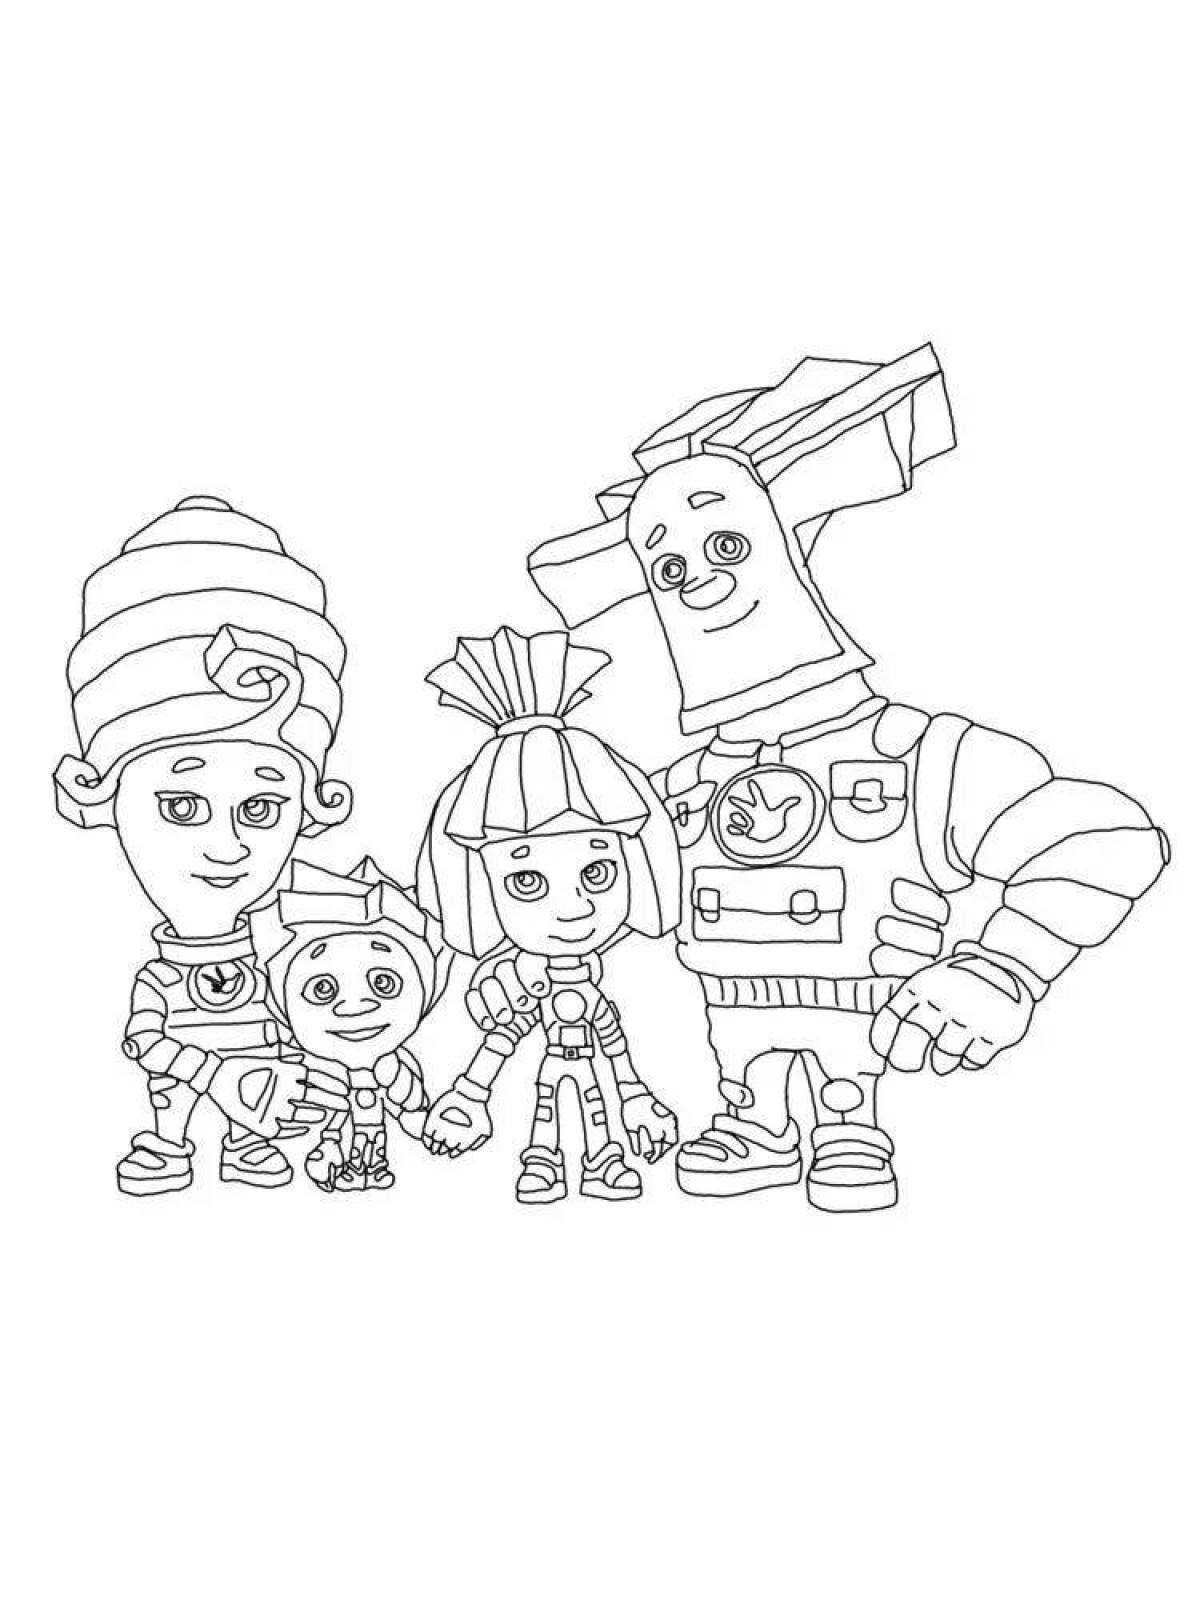 Outstanding fixies coloring pages for boys